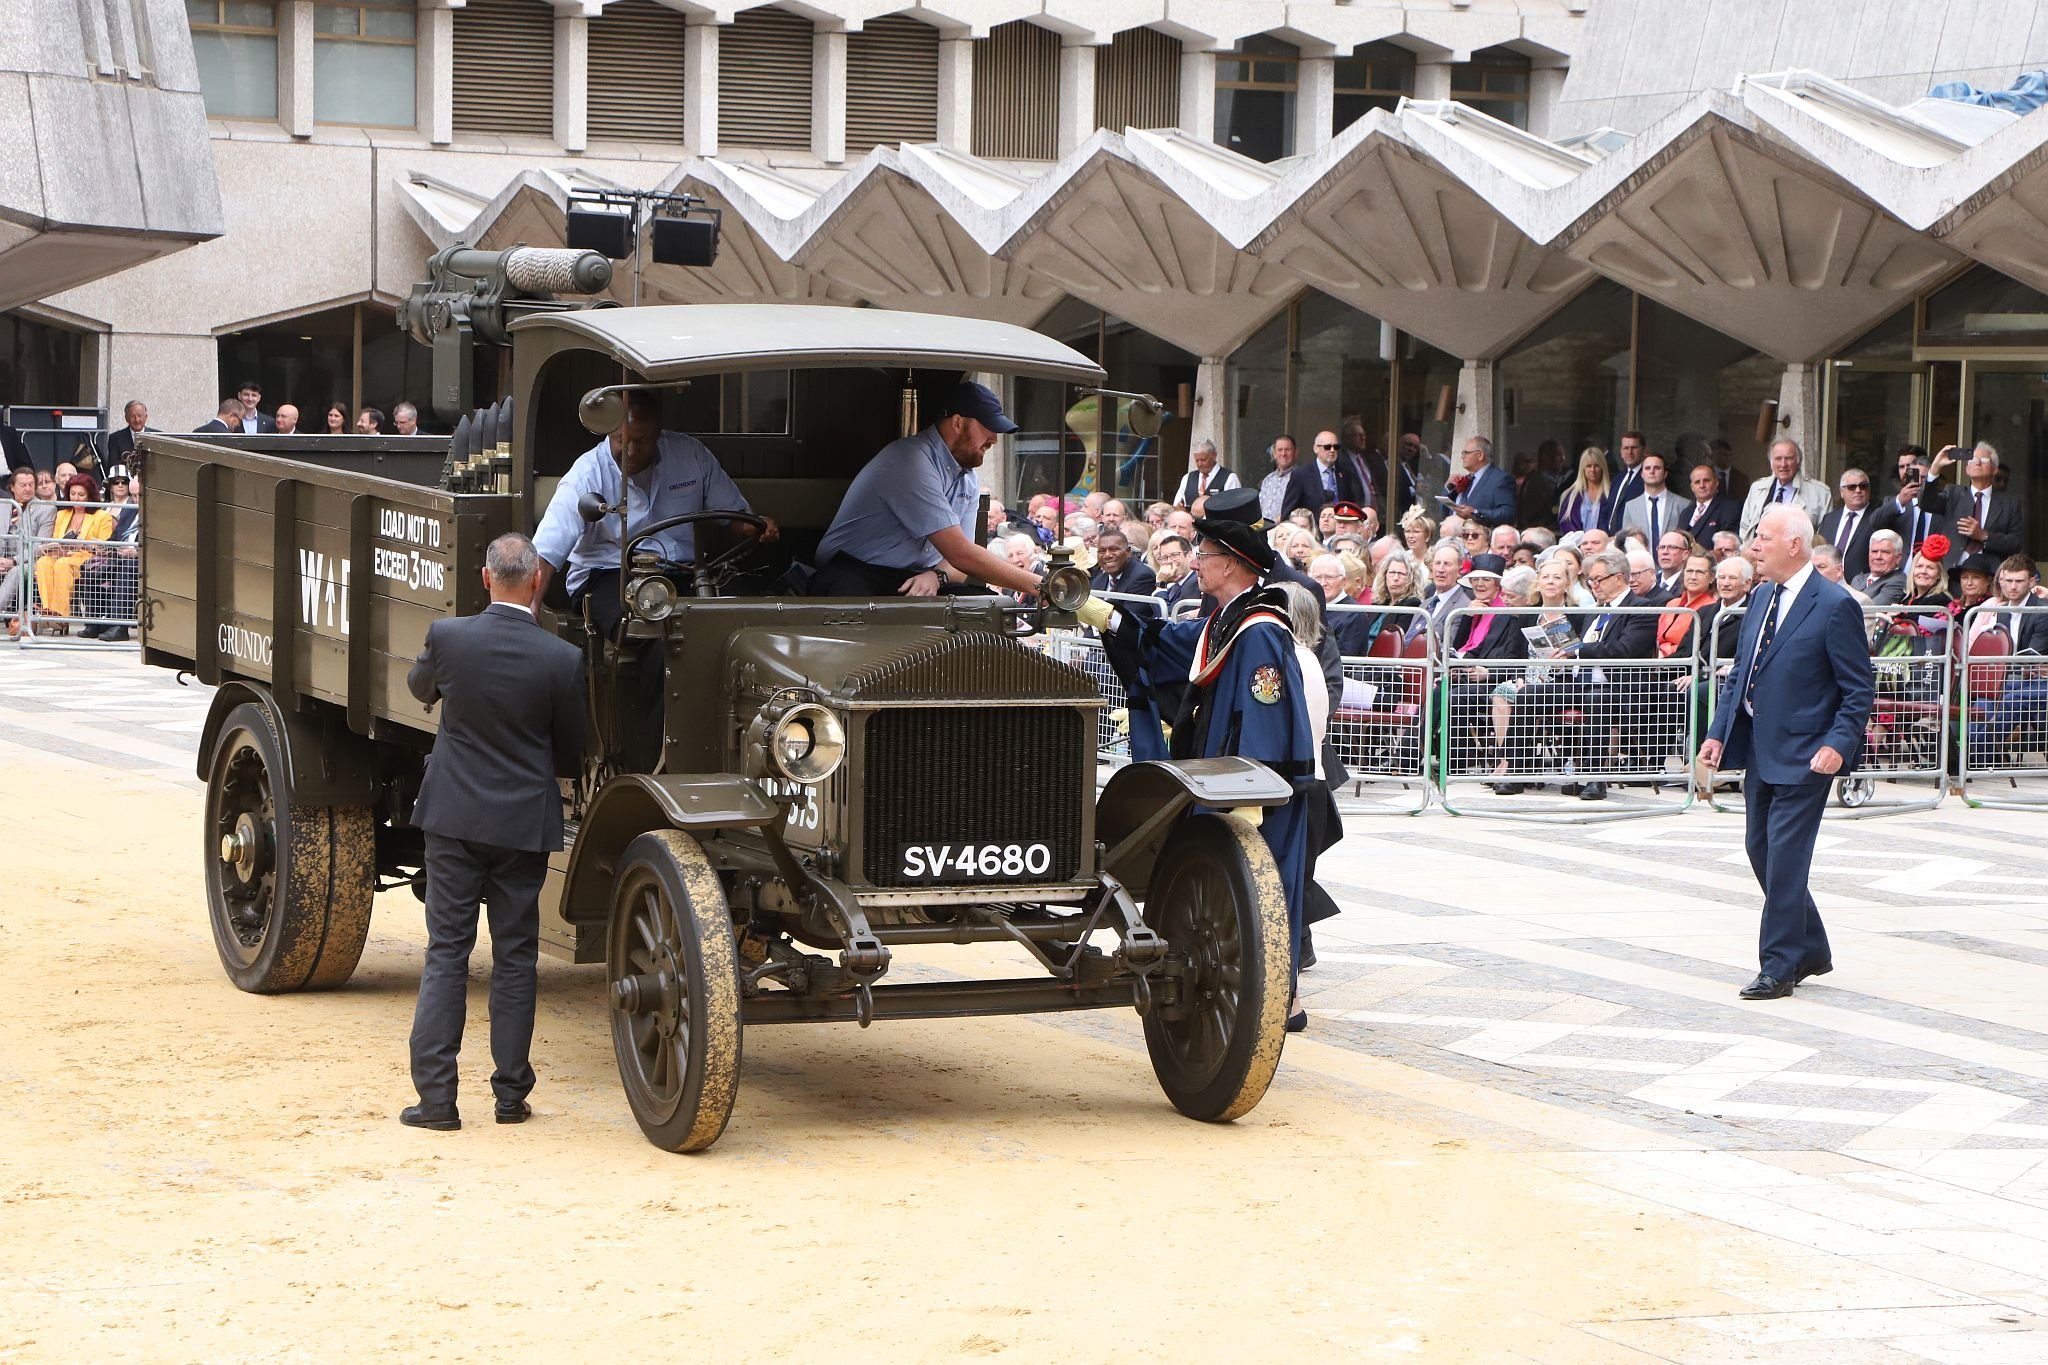 Pierce Arrow 1916 SV4680. City of London 2023 Cart Marking in Guildhall Yard on 22-Jul-2023. Hosted by the Worshipful Company of Carmen with the Lord Mayor of the City of London in attendance. Wooden plates on the vehicles are branded with hot irons to allow them to ply for trade in the Square Mile. Another of the City Livery Company's annual ceremonies.